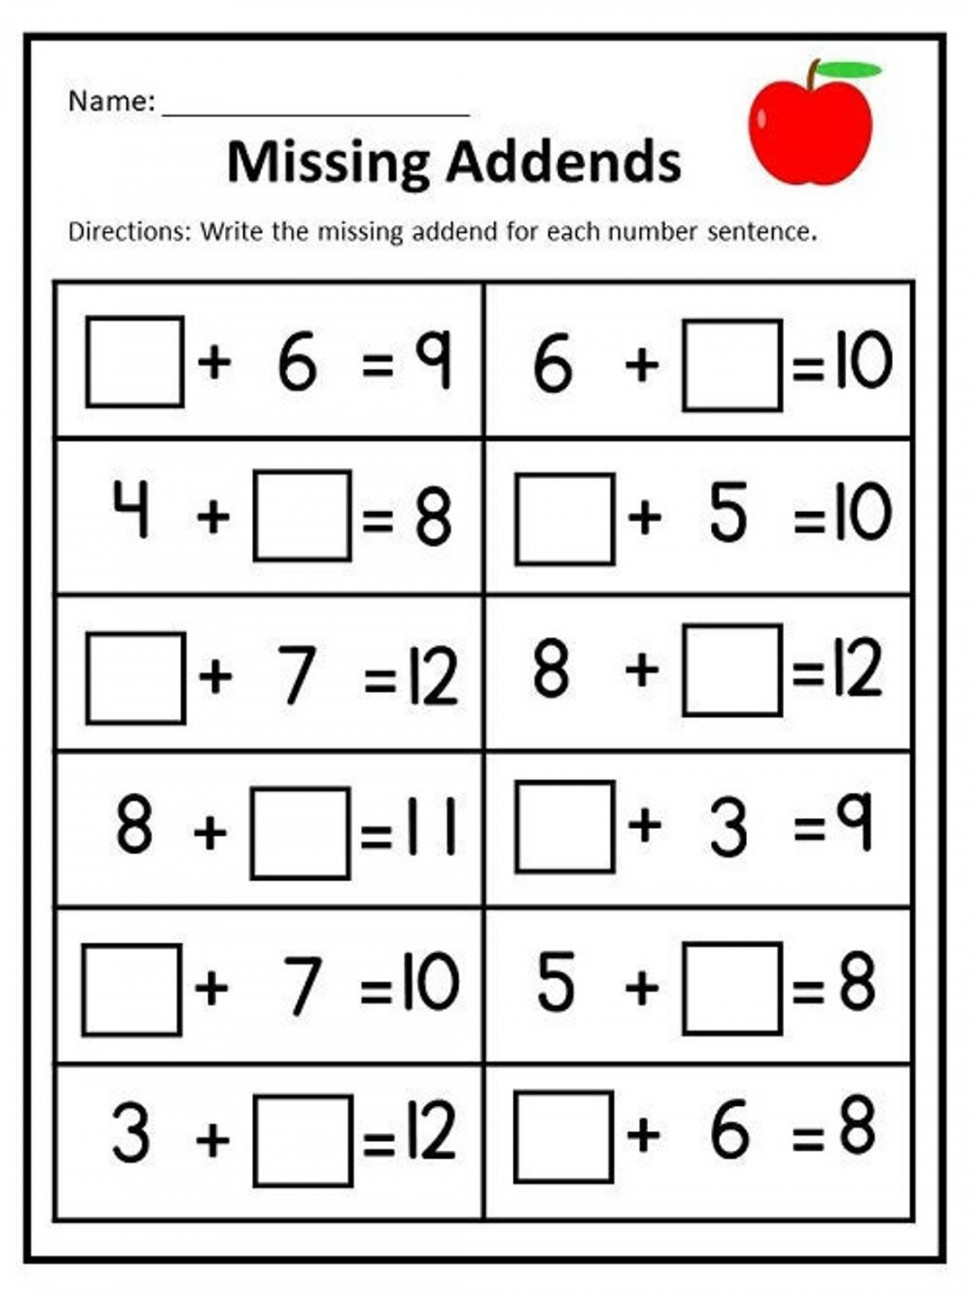 Printable Missing Addends Worksheets Numbers - for - Etsy